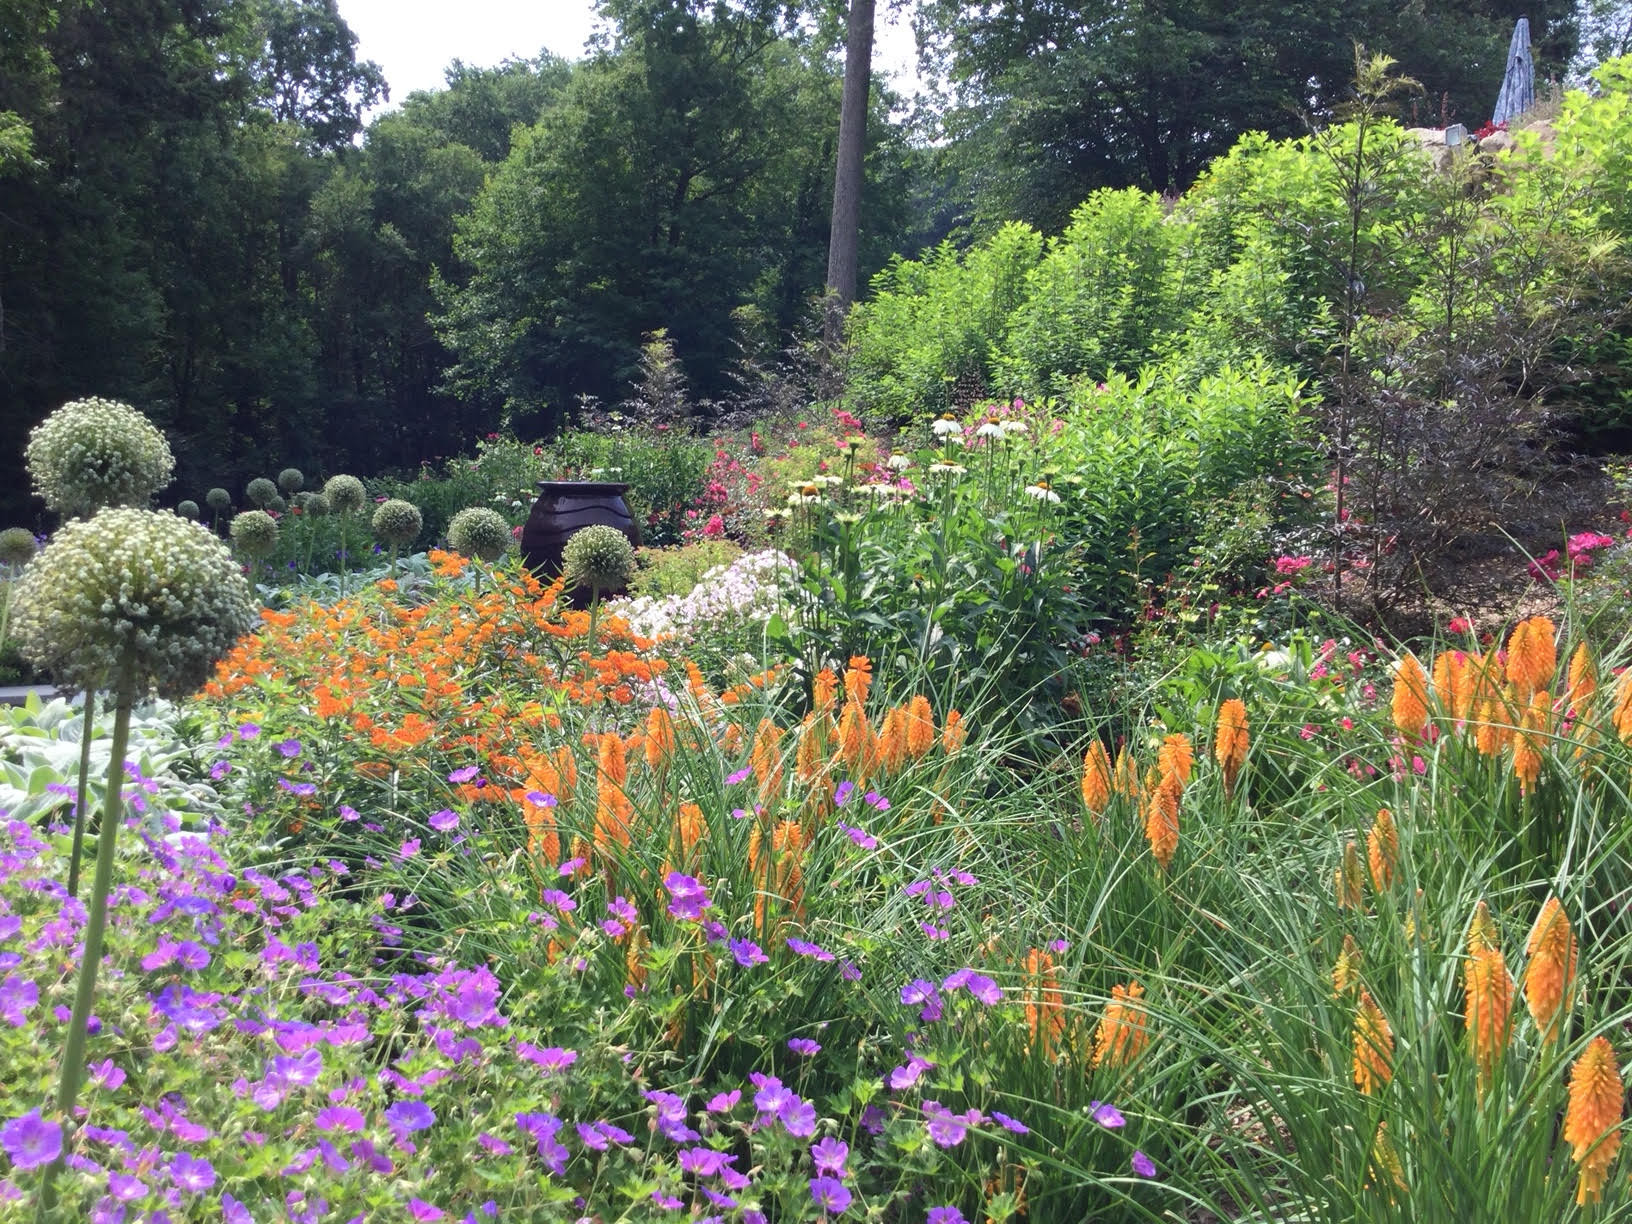 2nd Year Planted Perennial Garden in Pound Ridge, NY